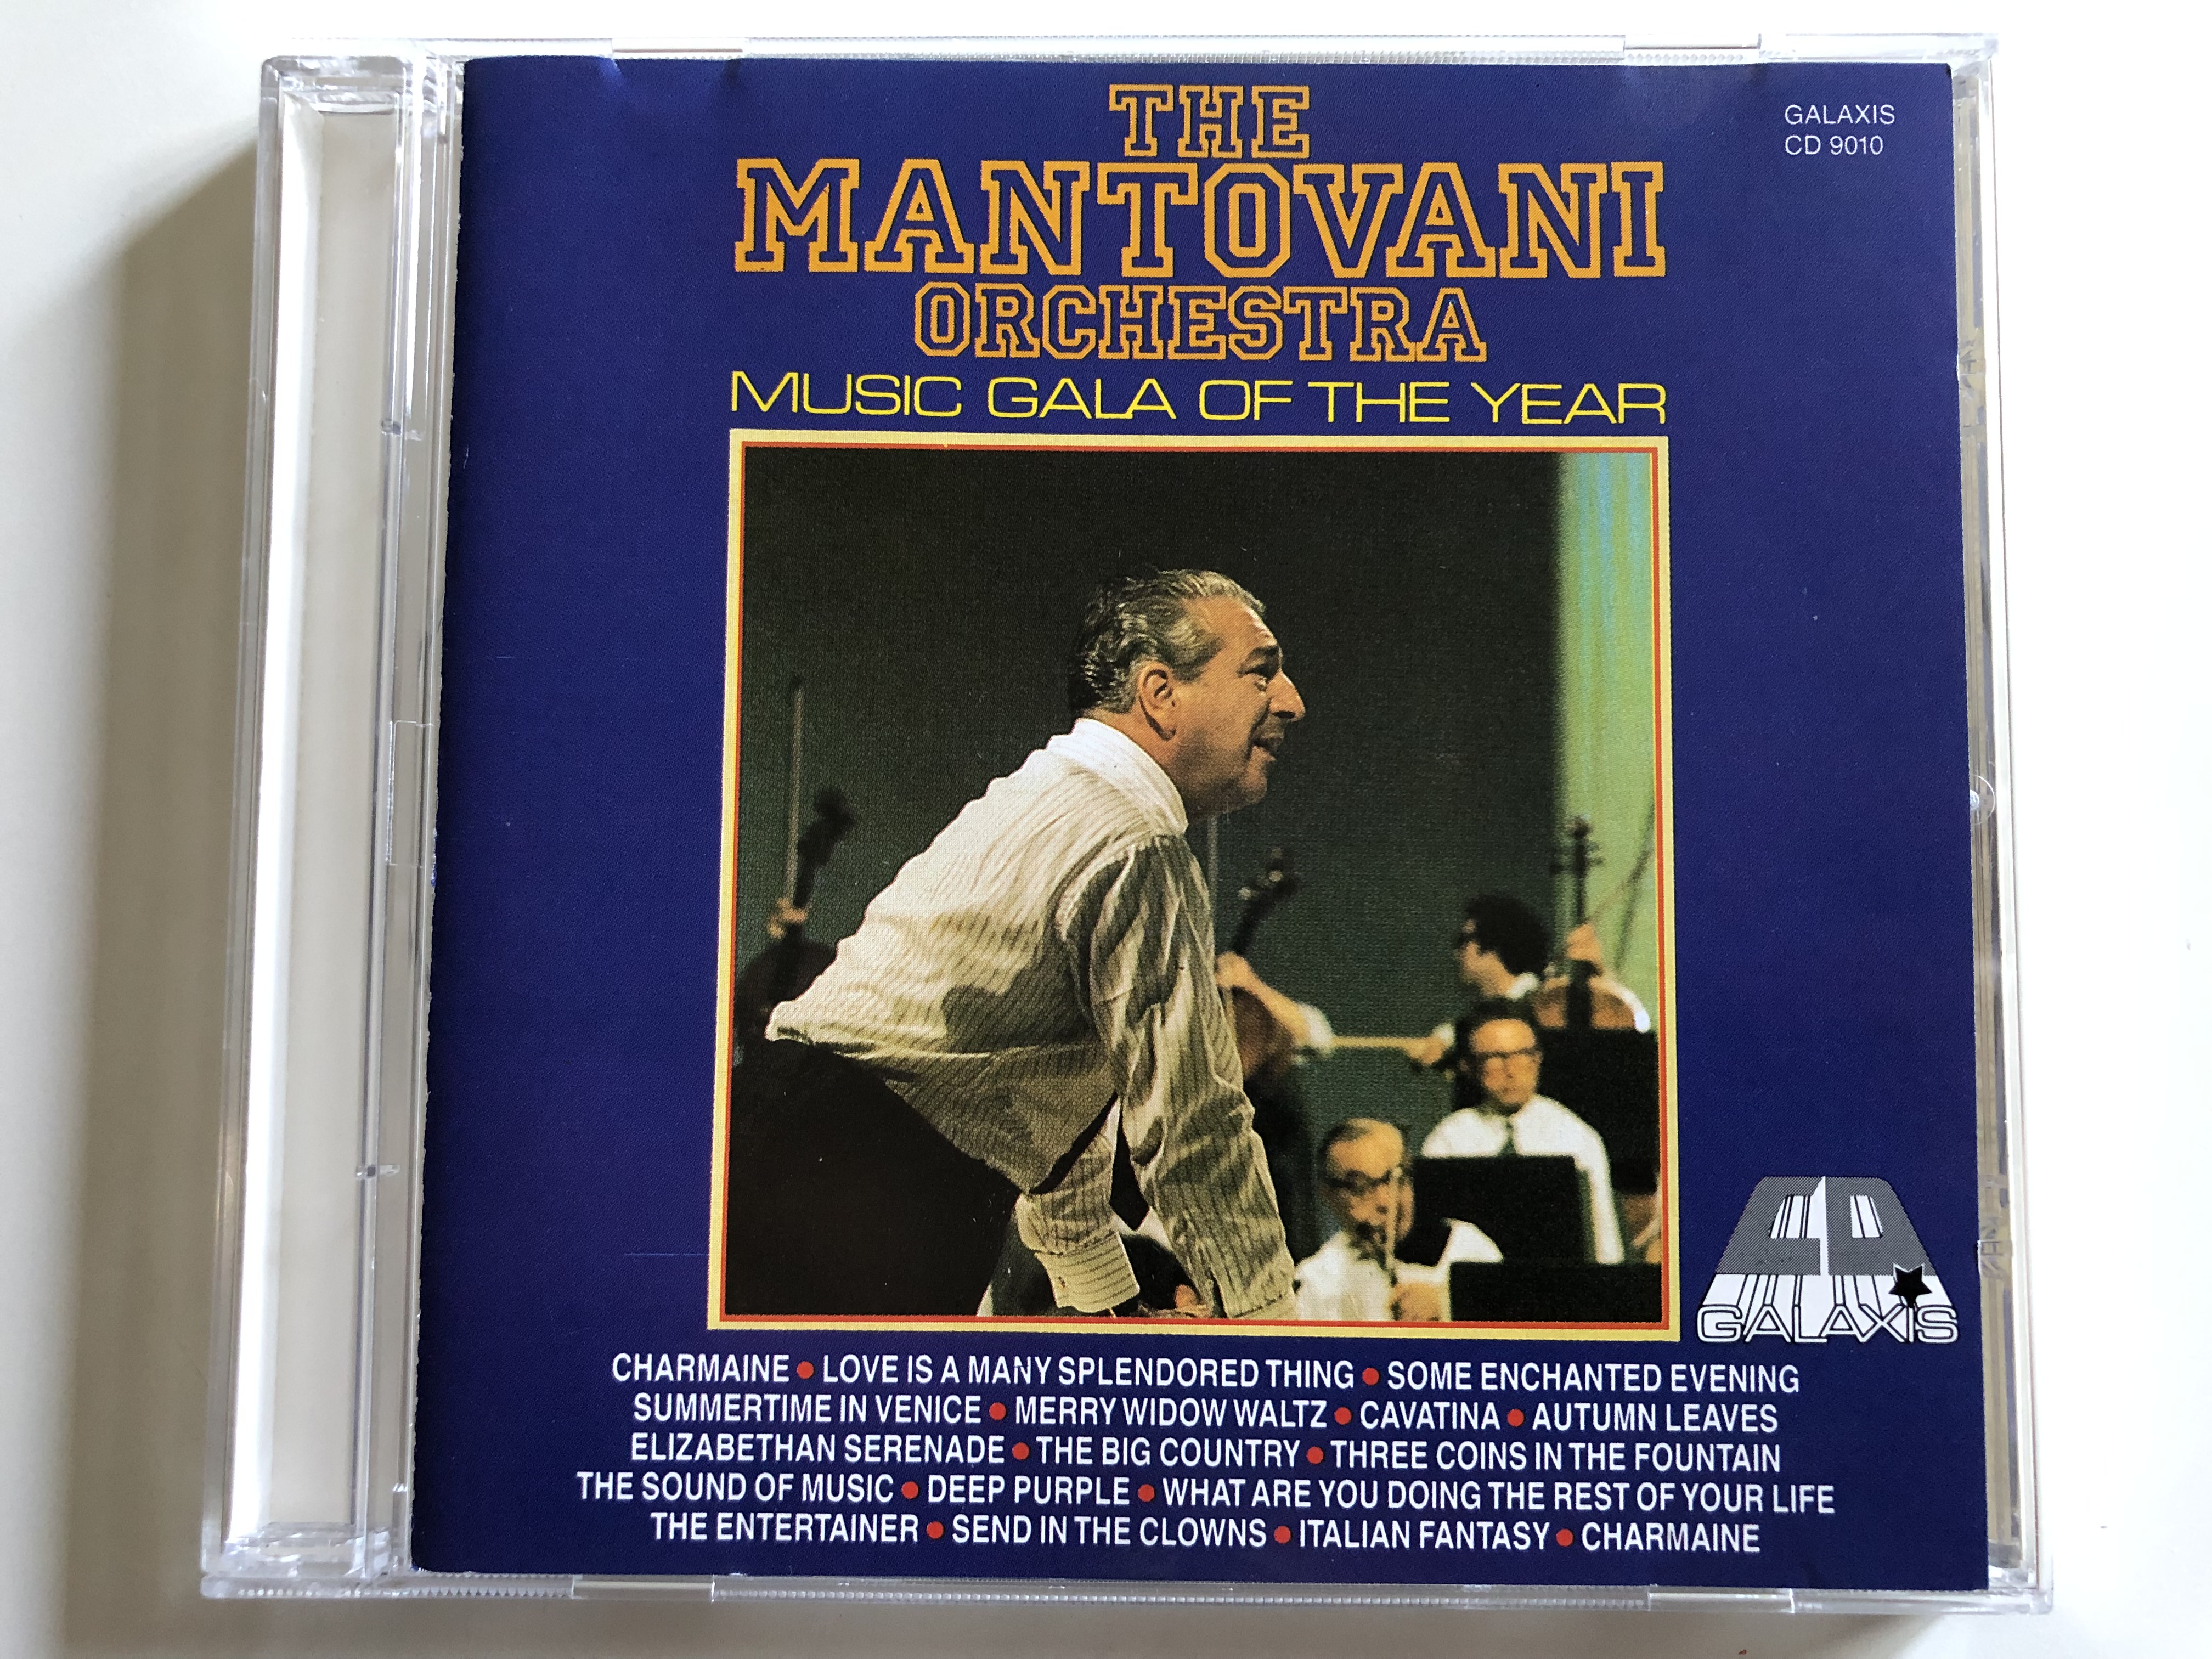 the-mantovani-orchestra-music-gala-of-the-year-charmaine-love-is-a-many-splendored-thing-some-enchanted-evening-summertime-in-venice-merry-widow-waltz-cavatina-autumn-leaves-galaxis-au-1-.jpg